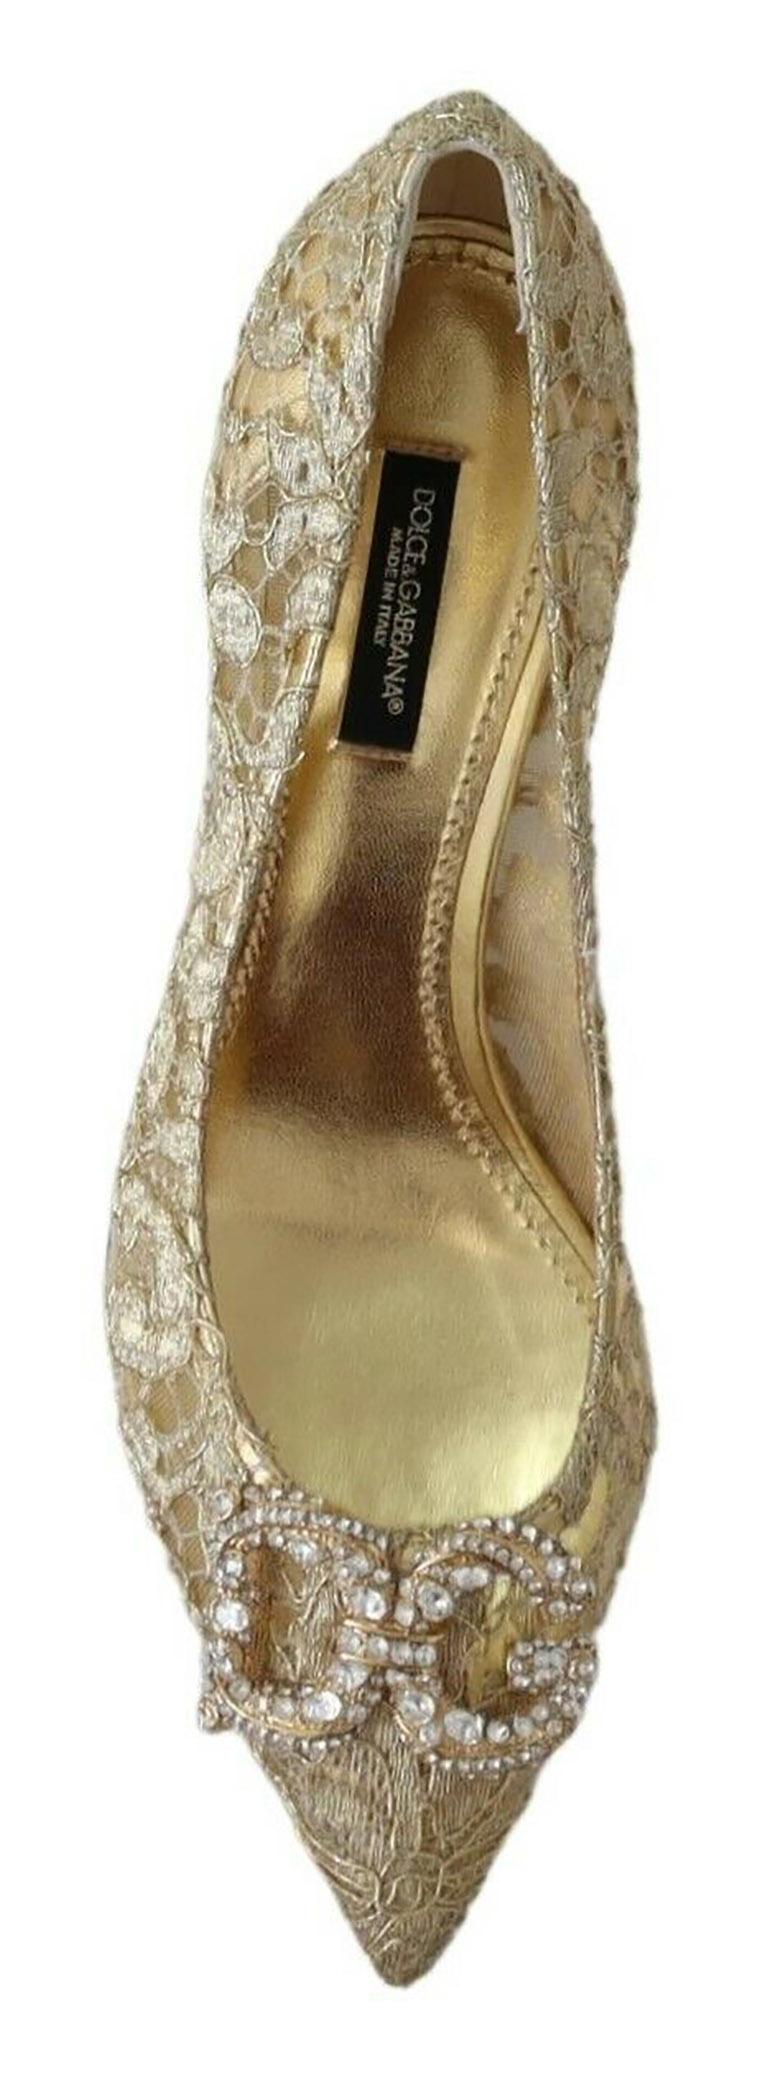 Women's Dolce & Gabbana Gold Floral Lace Shoes Pumps Heels With DG Logo Jewels Crystals